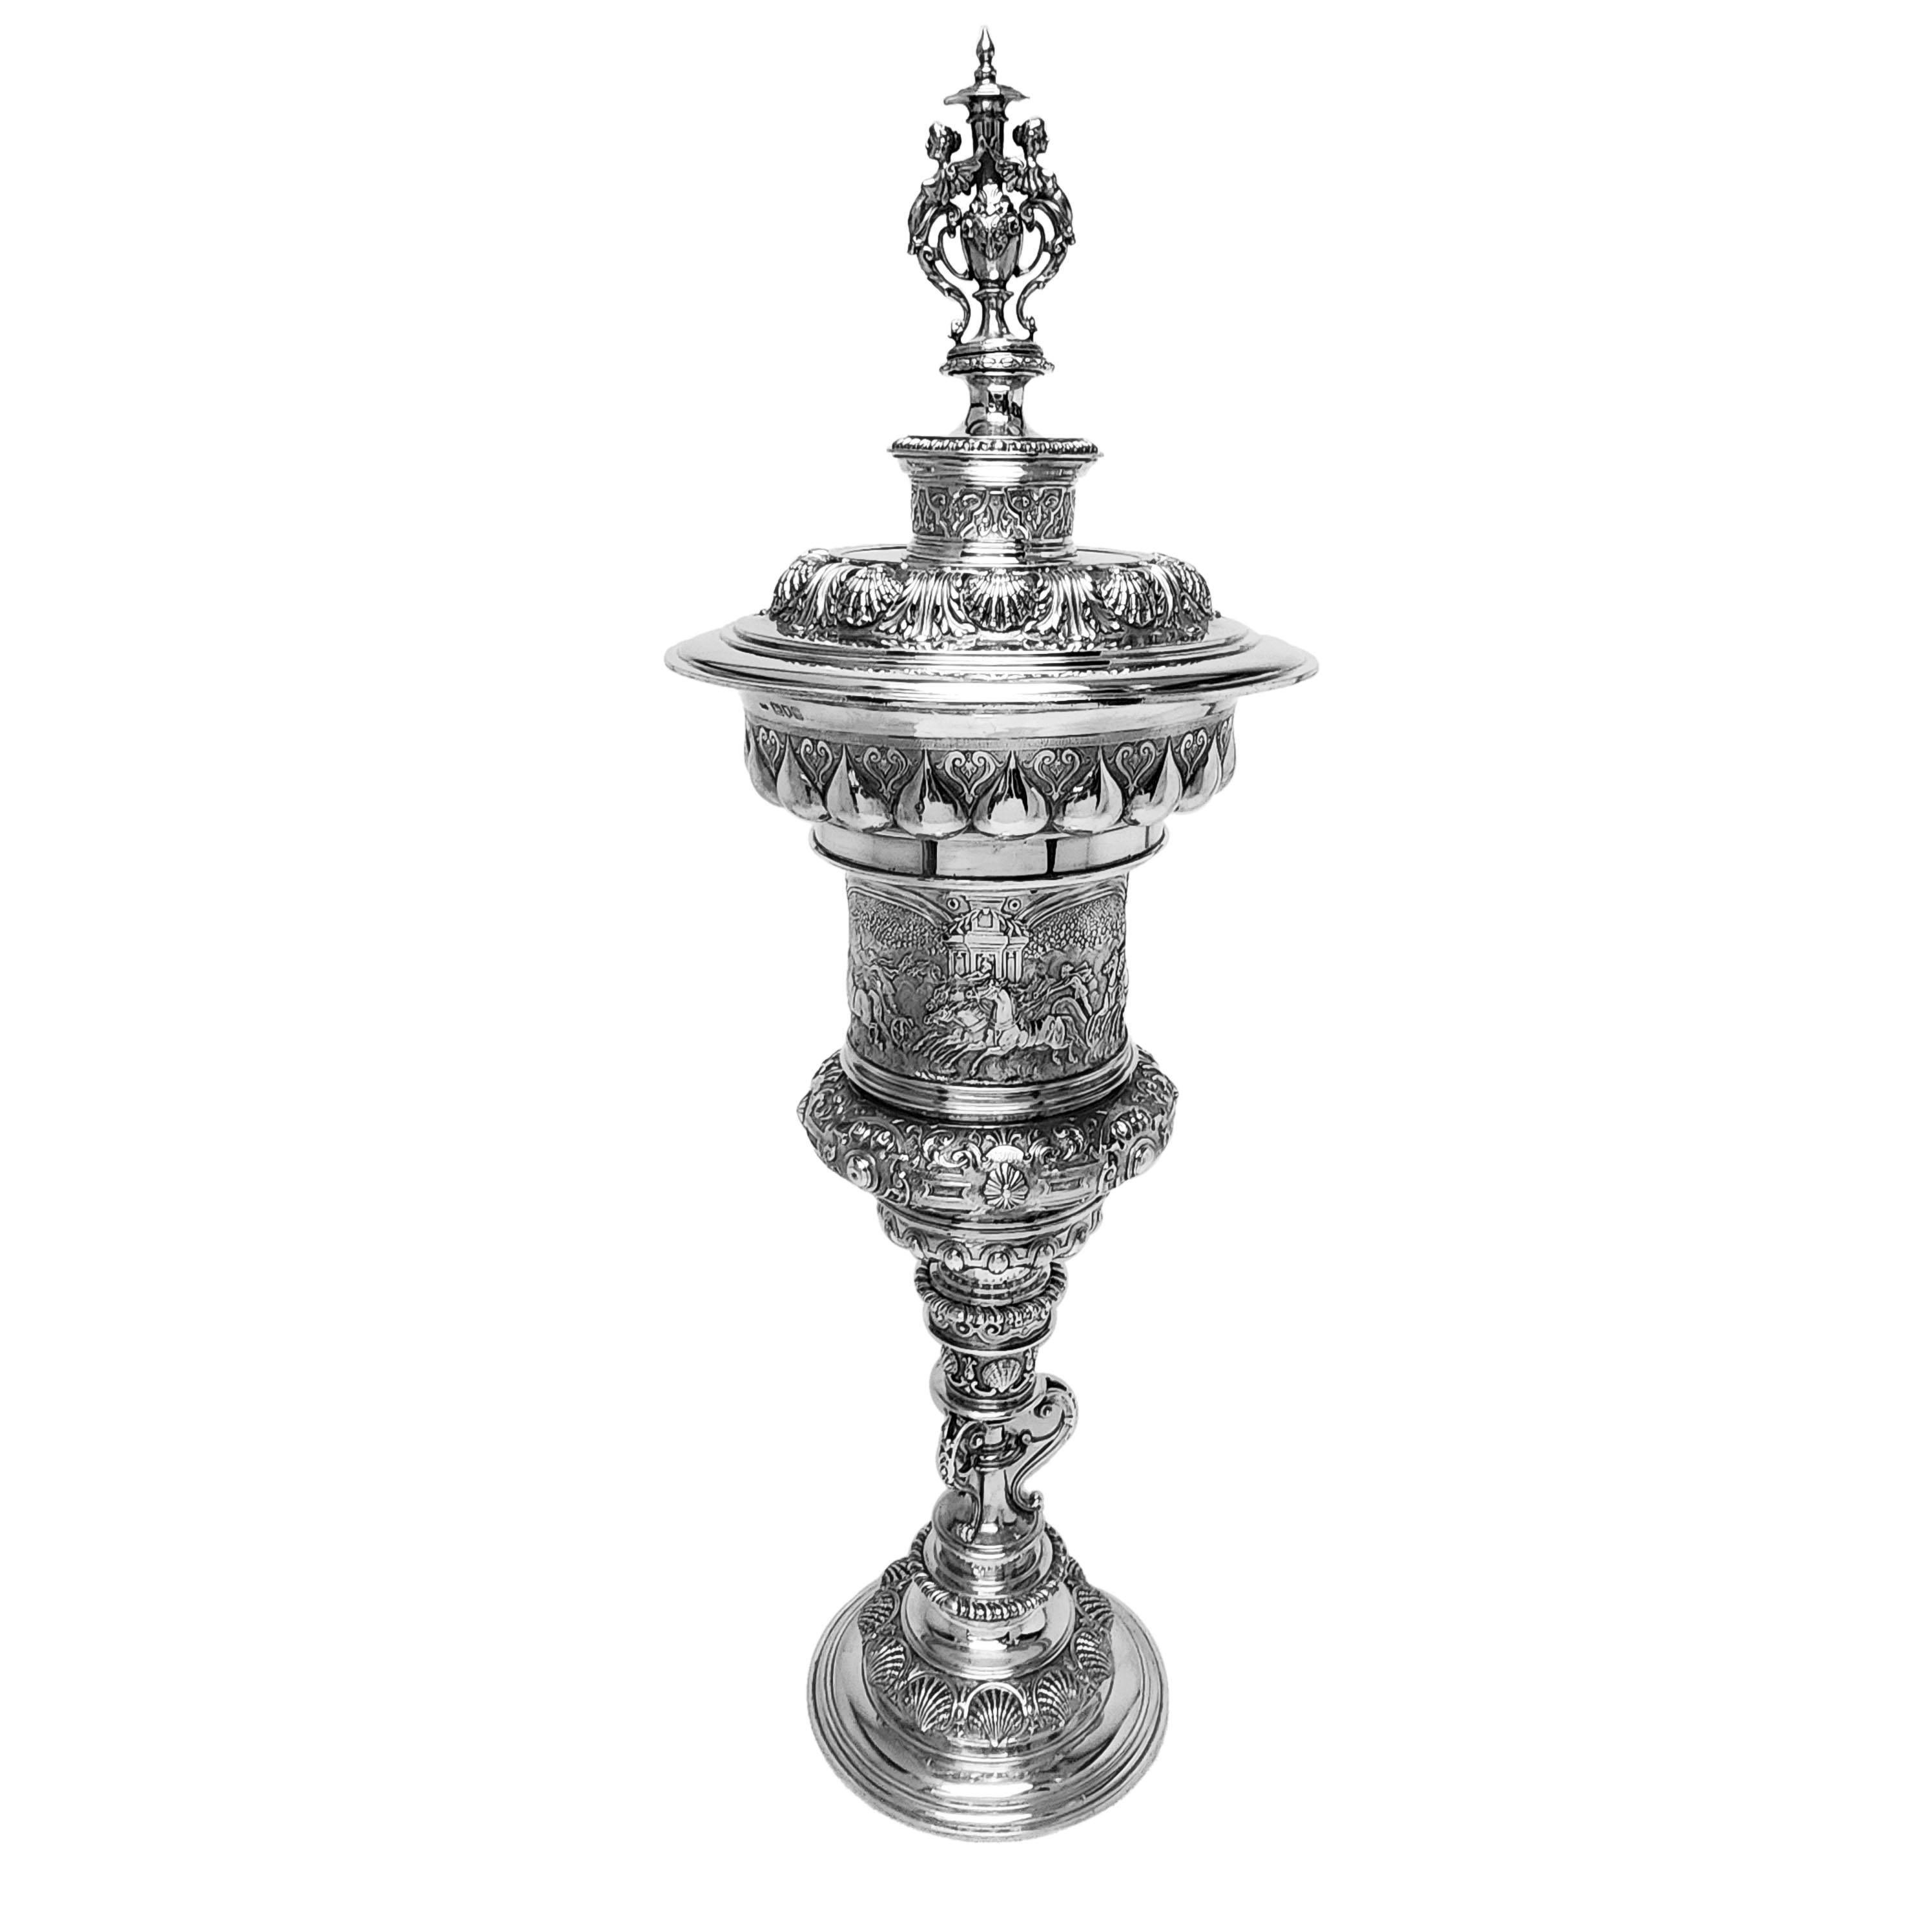 A magnificent Antique Sterling Silver Steeple Cup in the style of the original steeple cups of the early 1600s. The Cup is embellished with rich, detailed chased designs. The Cup has a central band is a frieze engraved with a classical chariot race.